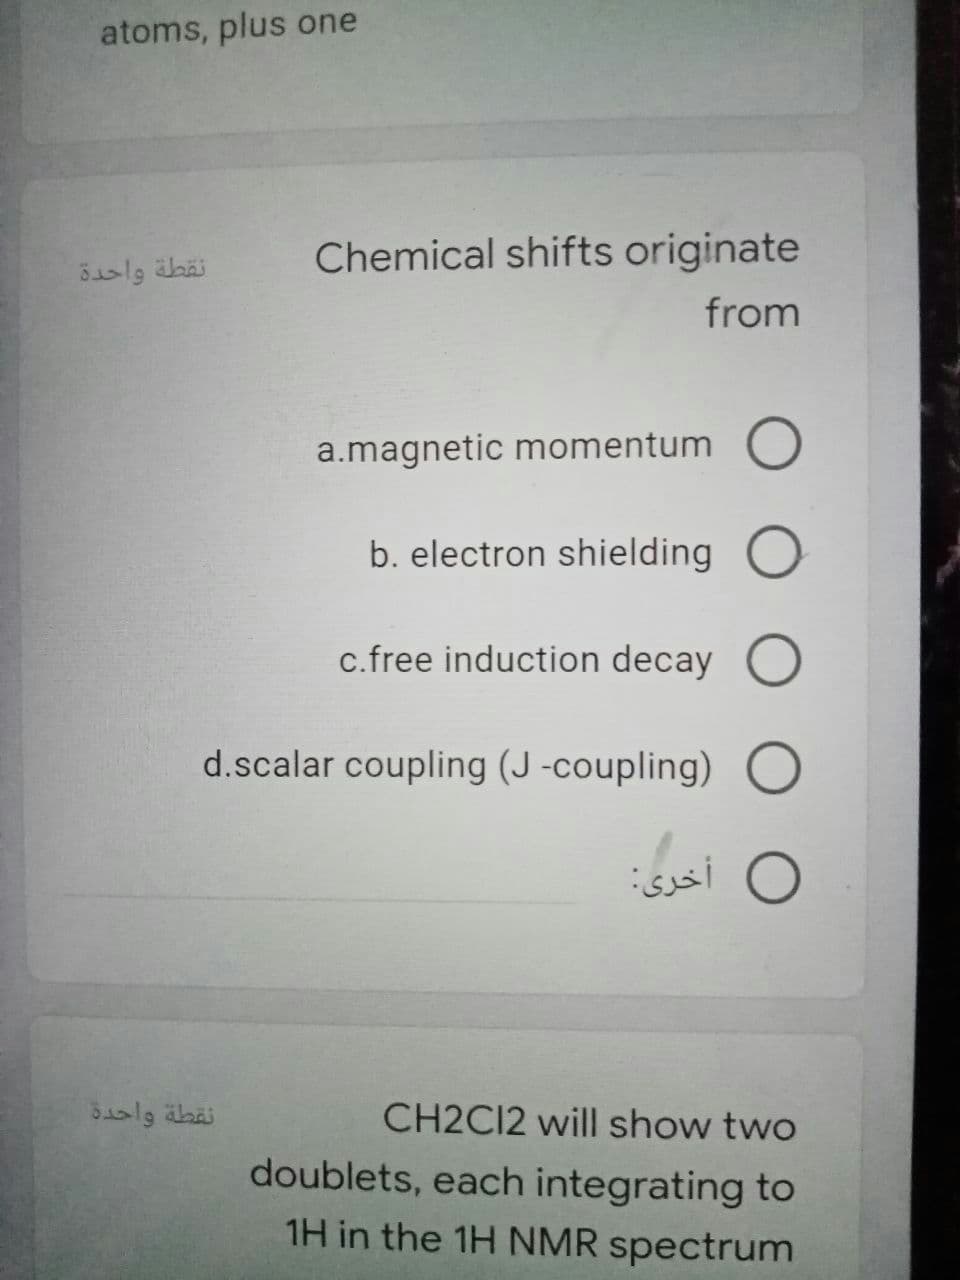 atoms, plus one
Chemical shifts originate
نقطة واحدة
from
a.magnetic momentum O
b. electron shielding O
c.free induction decay O
d.scalar coupling (J -coupling) O
O أخری:
CH2C12 will show two
doublets, each integrating to
1H in the 1H NMR spectrum
